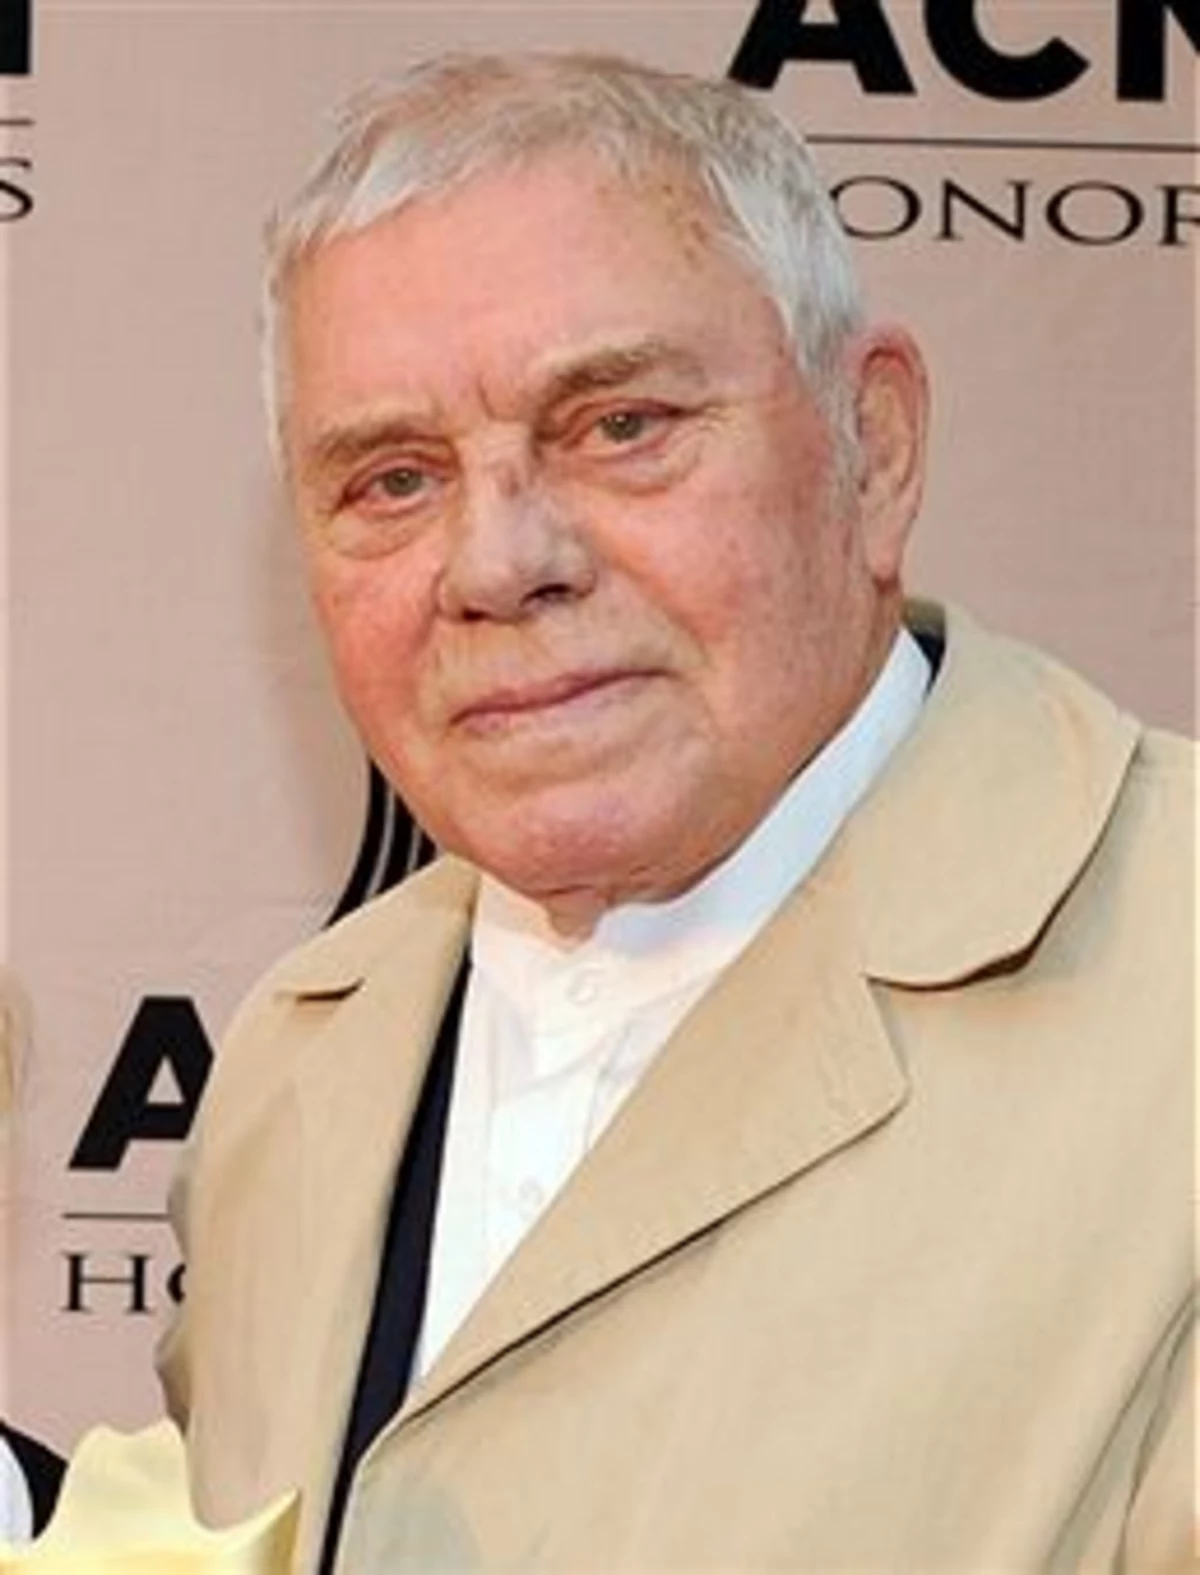 What is Tom T. Hall Doing Tomorrow?